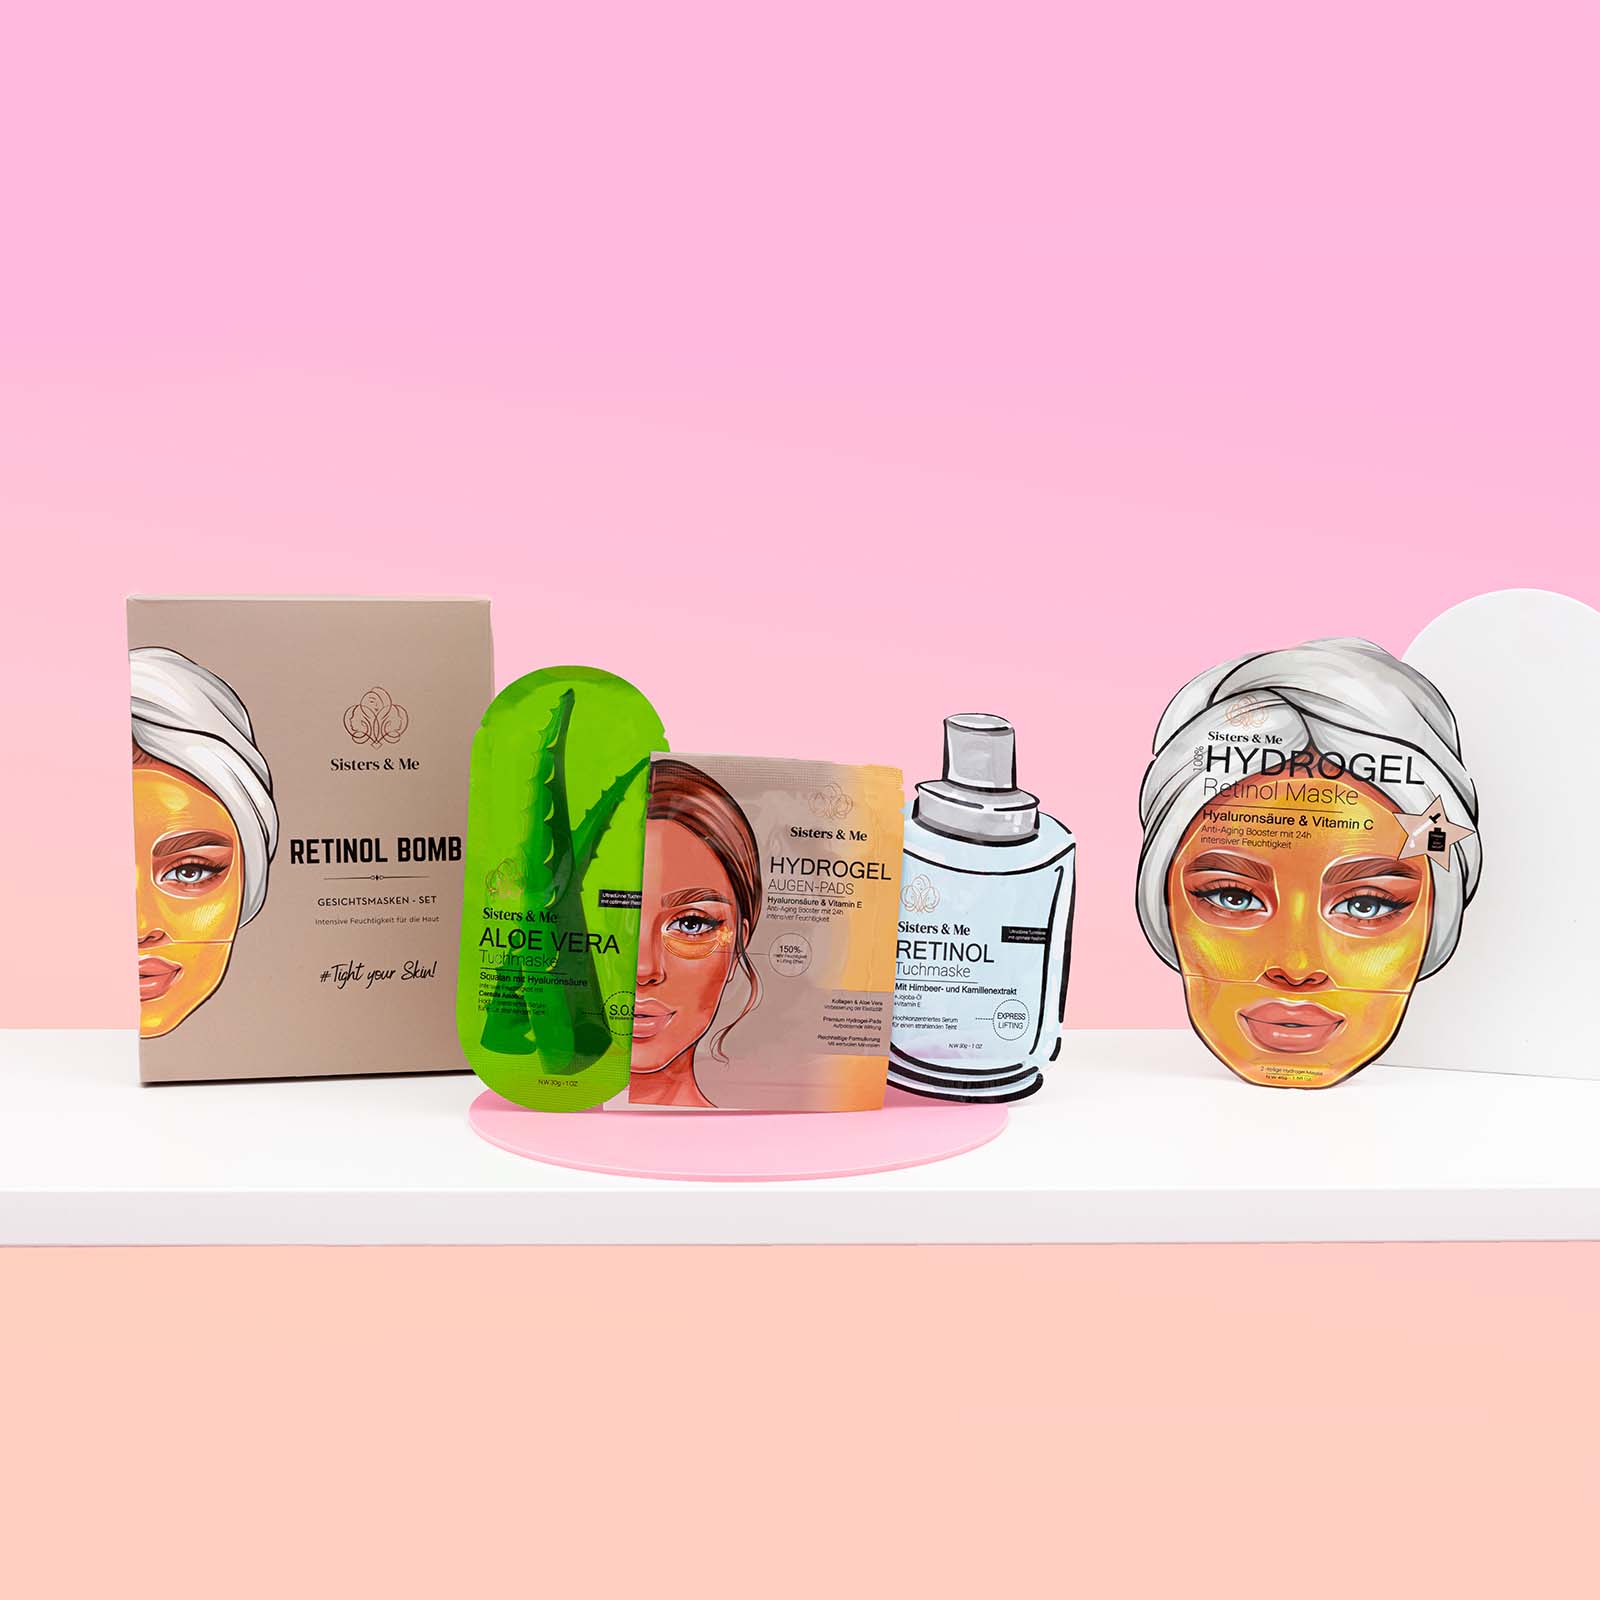 cute pink shelfie product photos for face mask brand sisters and me. Styled product stills by colourpop studio